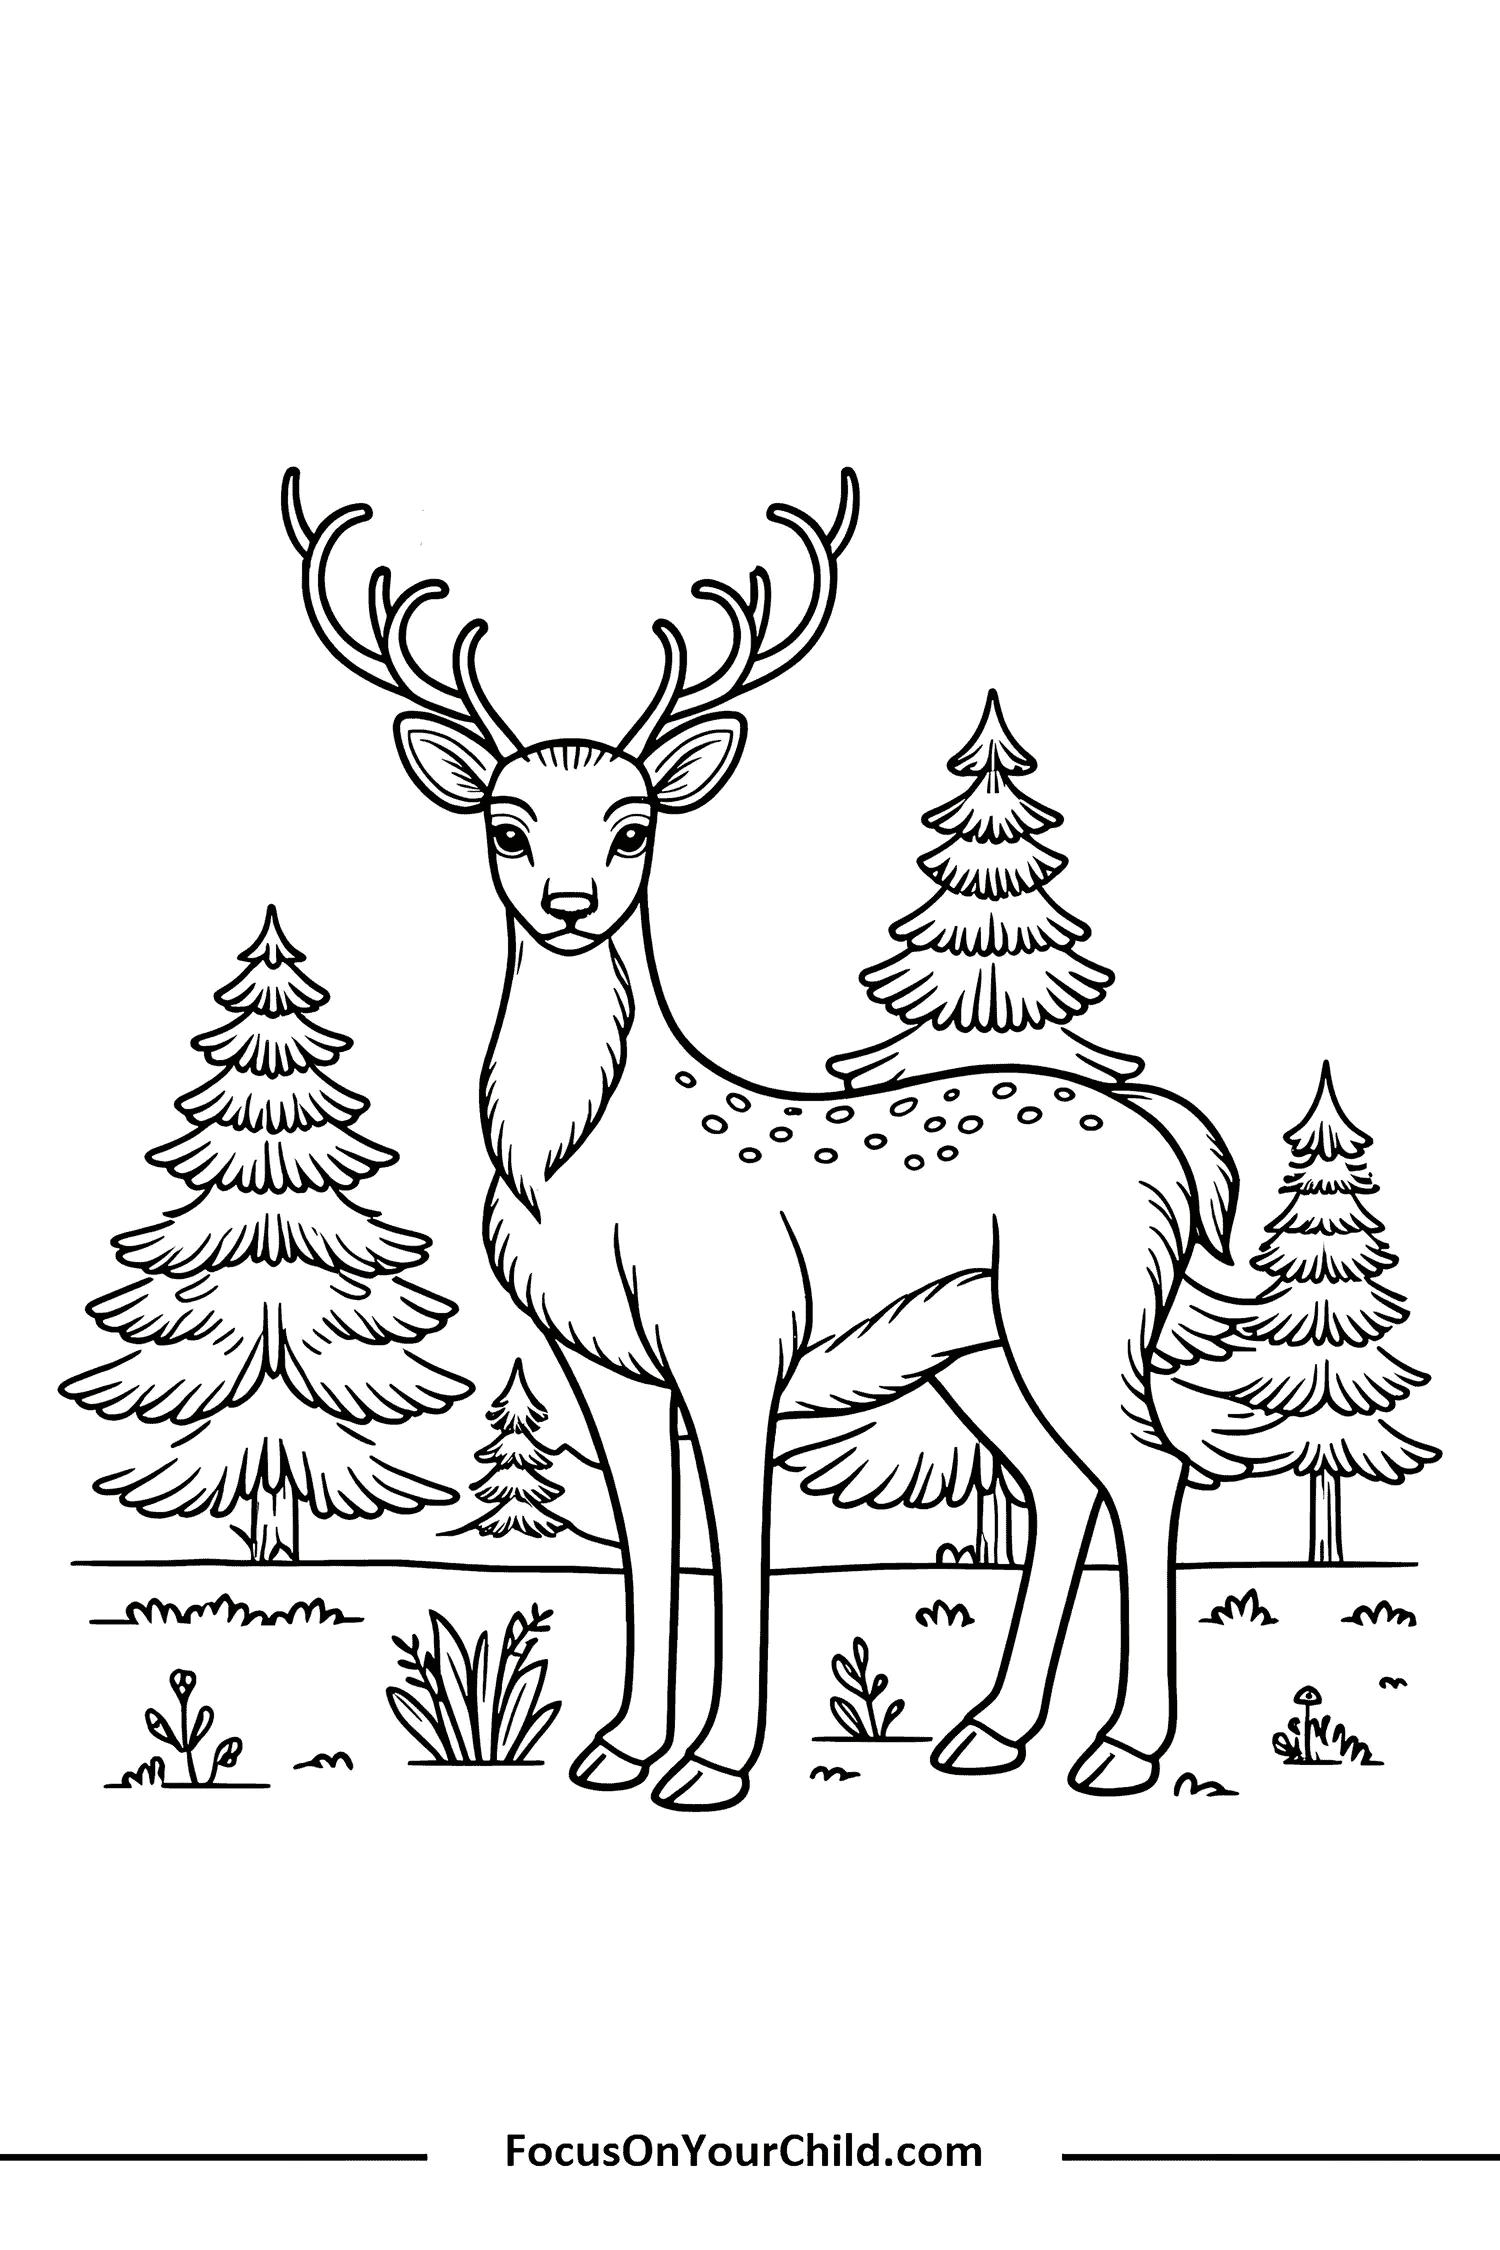 Stylized deer coloring page for kids from FocusOnYourChild.com.